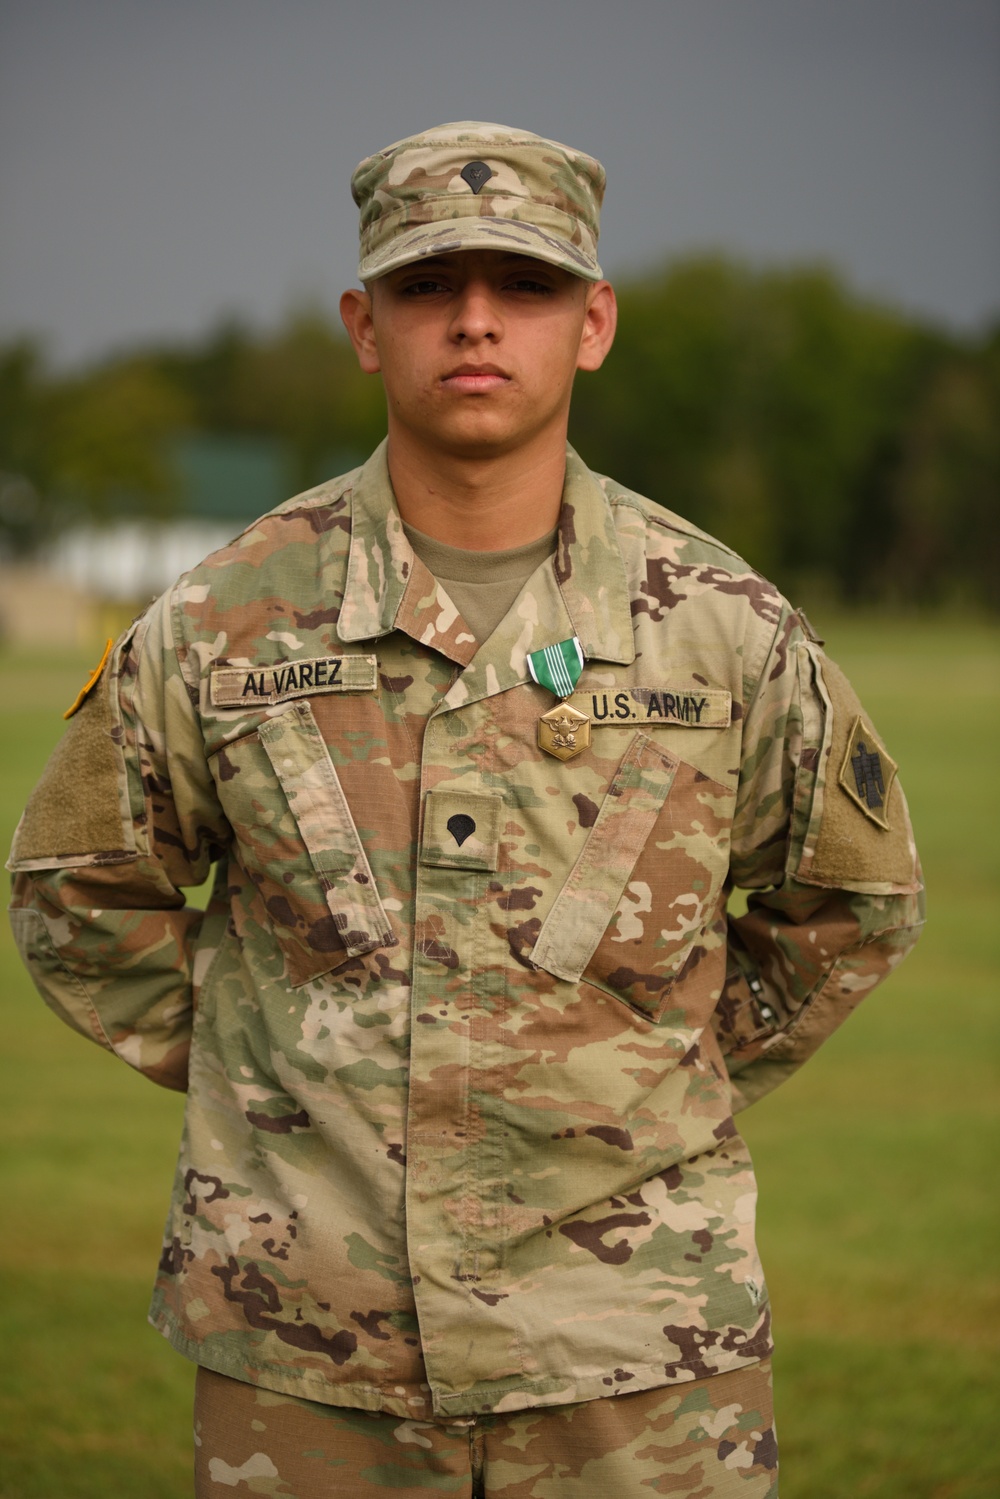 Colgate, Oklahoma, Native takes title of Oklahoma Army National Guard Best Warrior Competition 2019